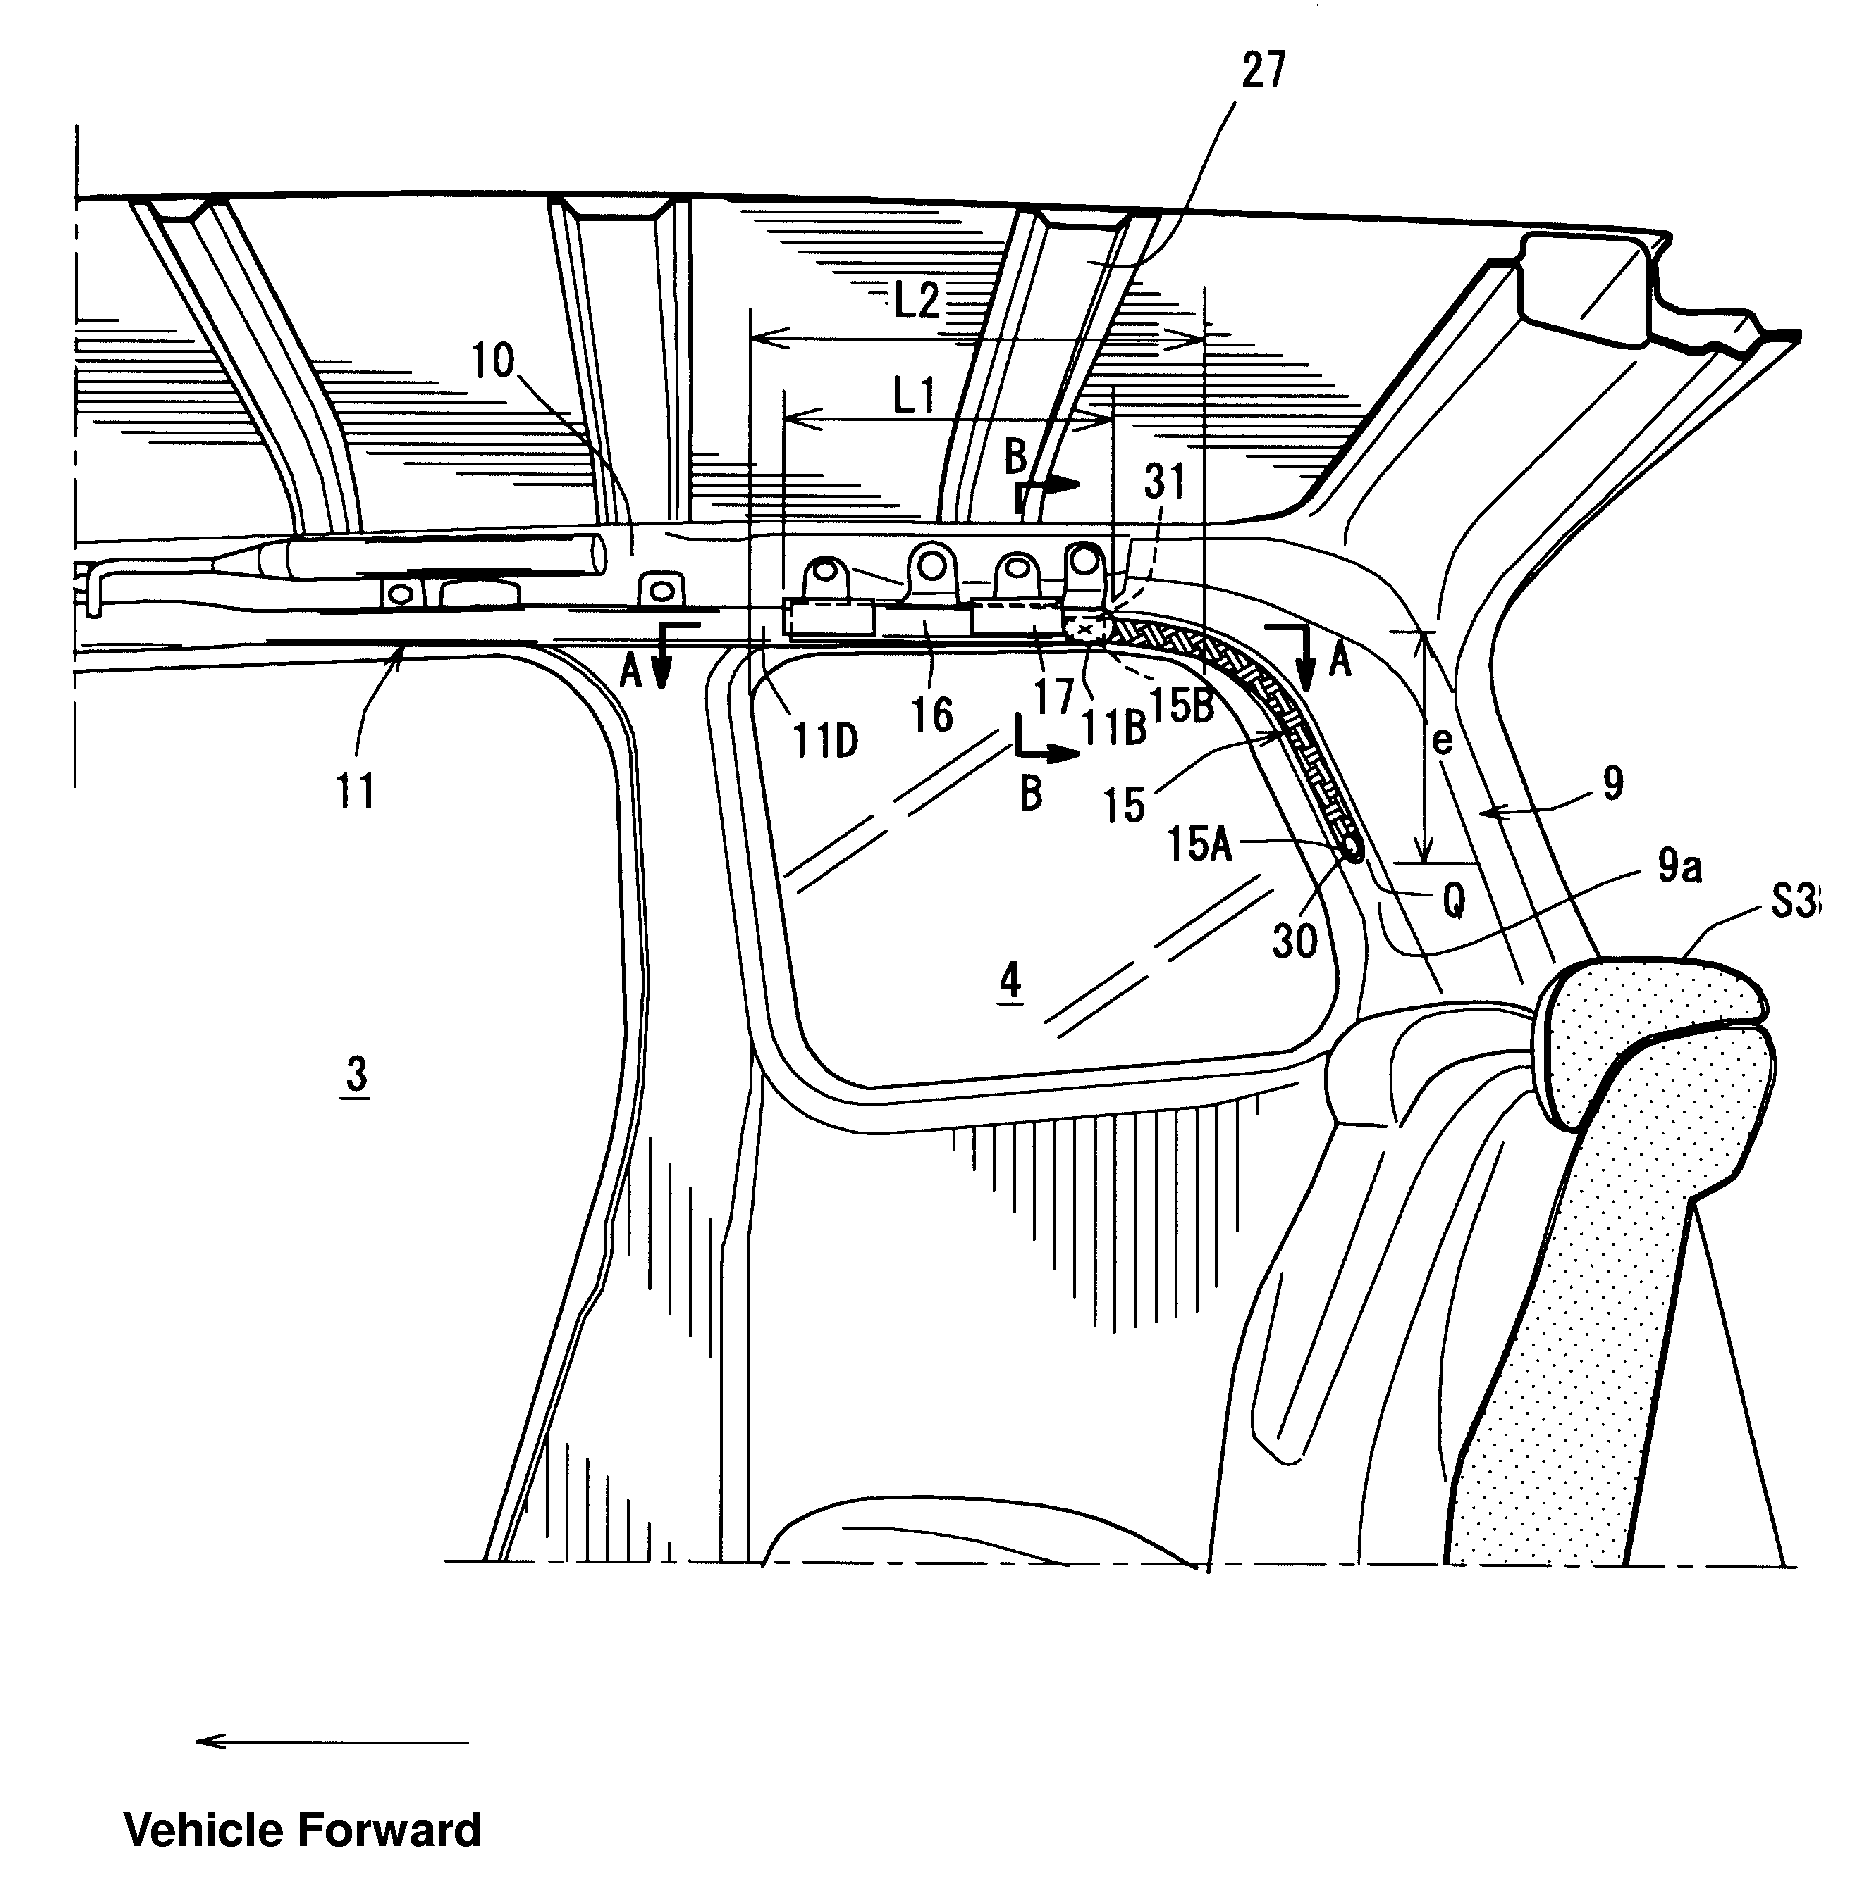 Interior structure of vehicle equipped with curtain airbag